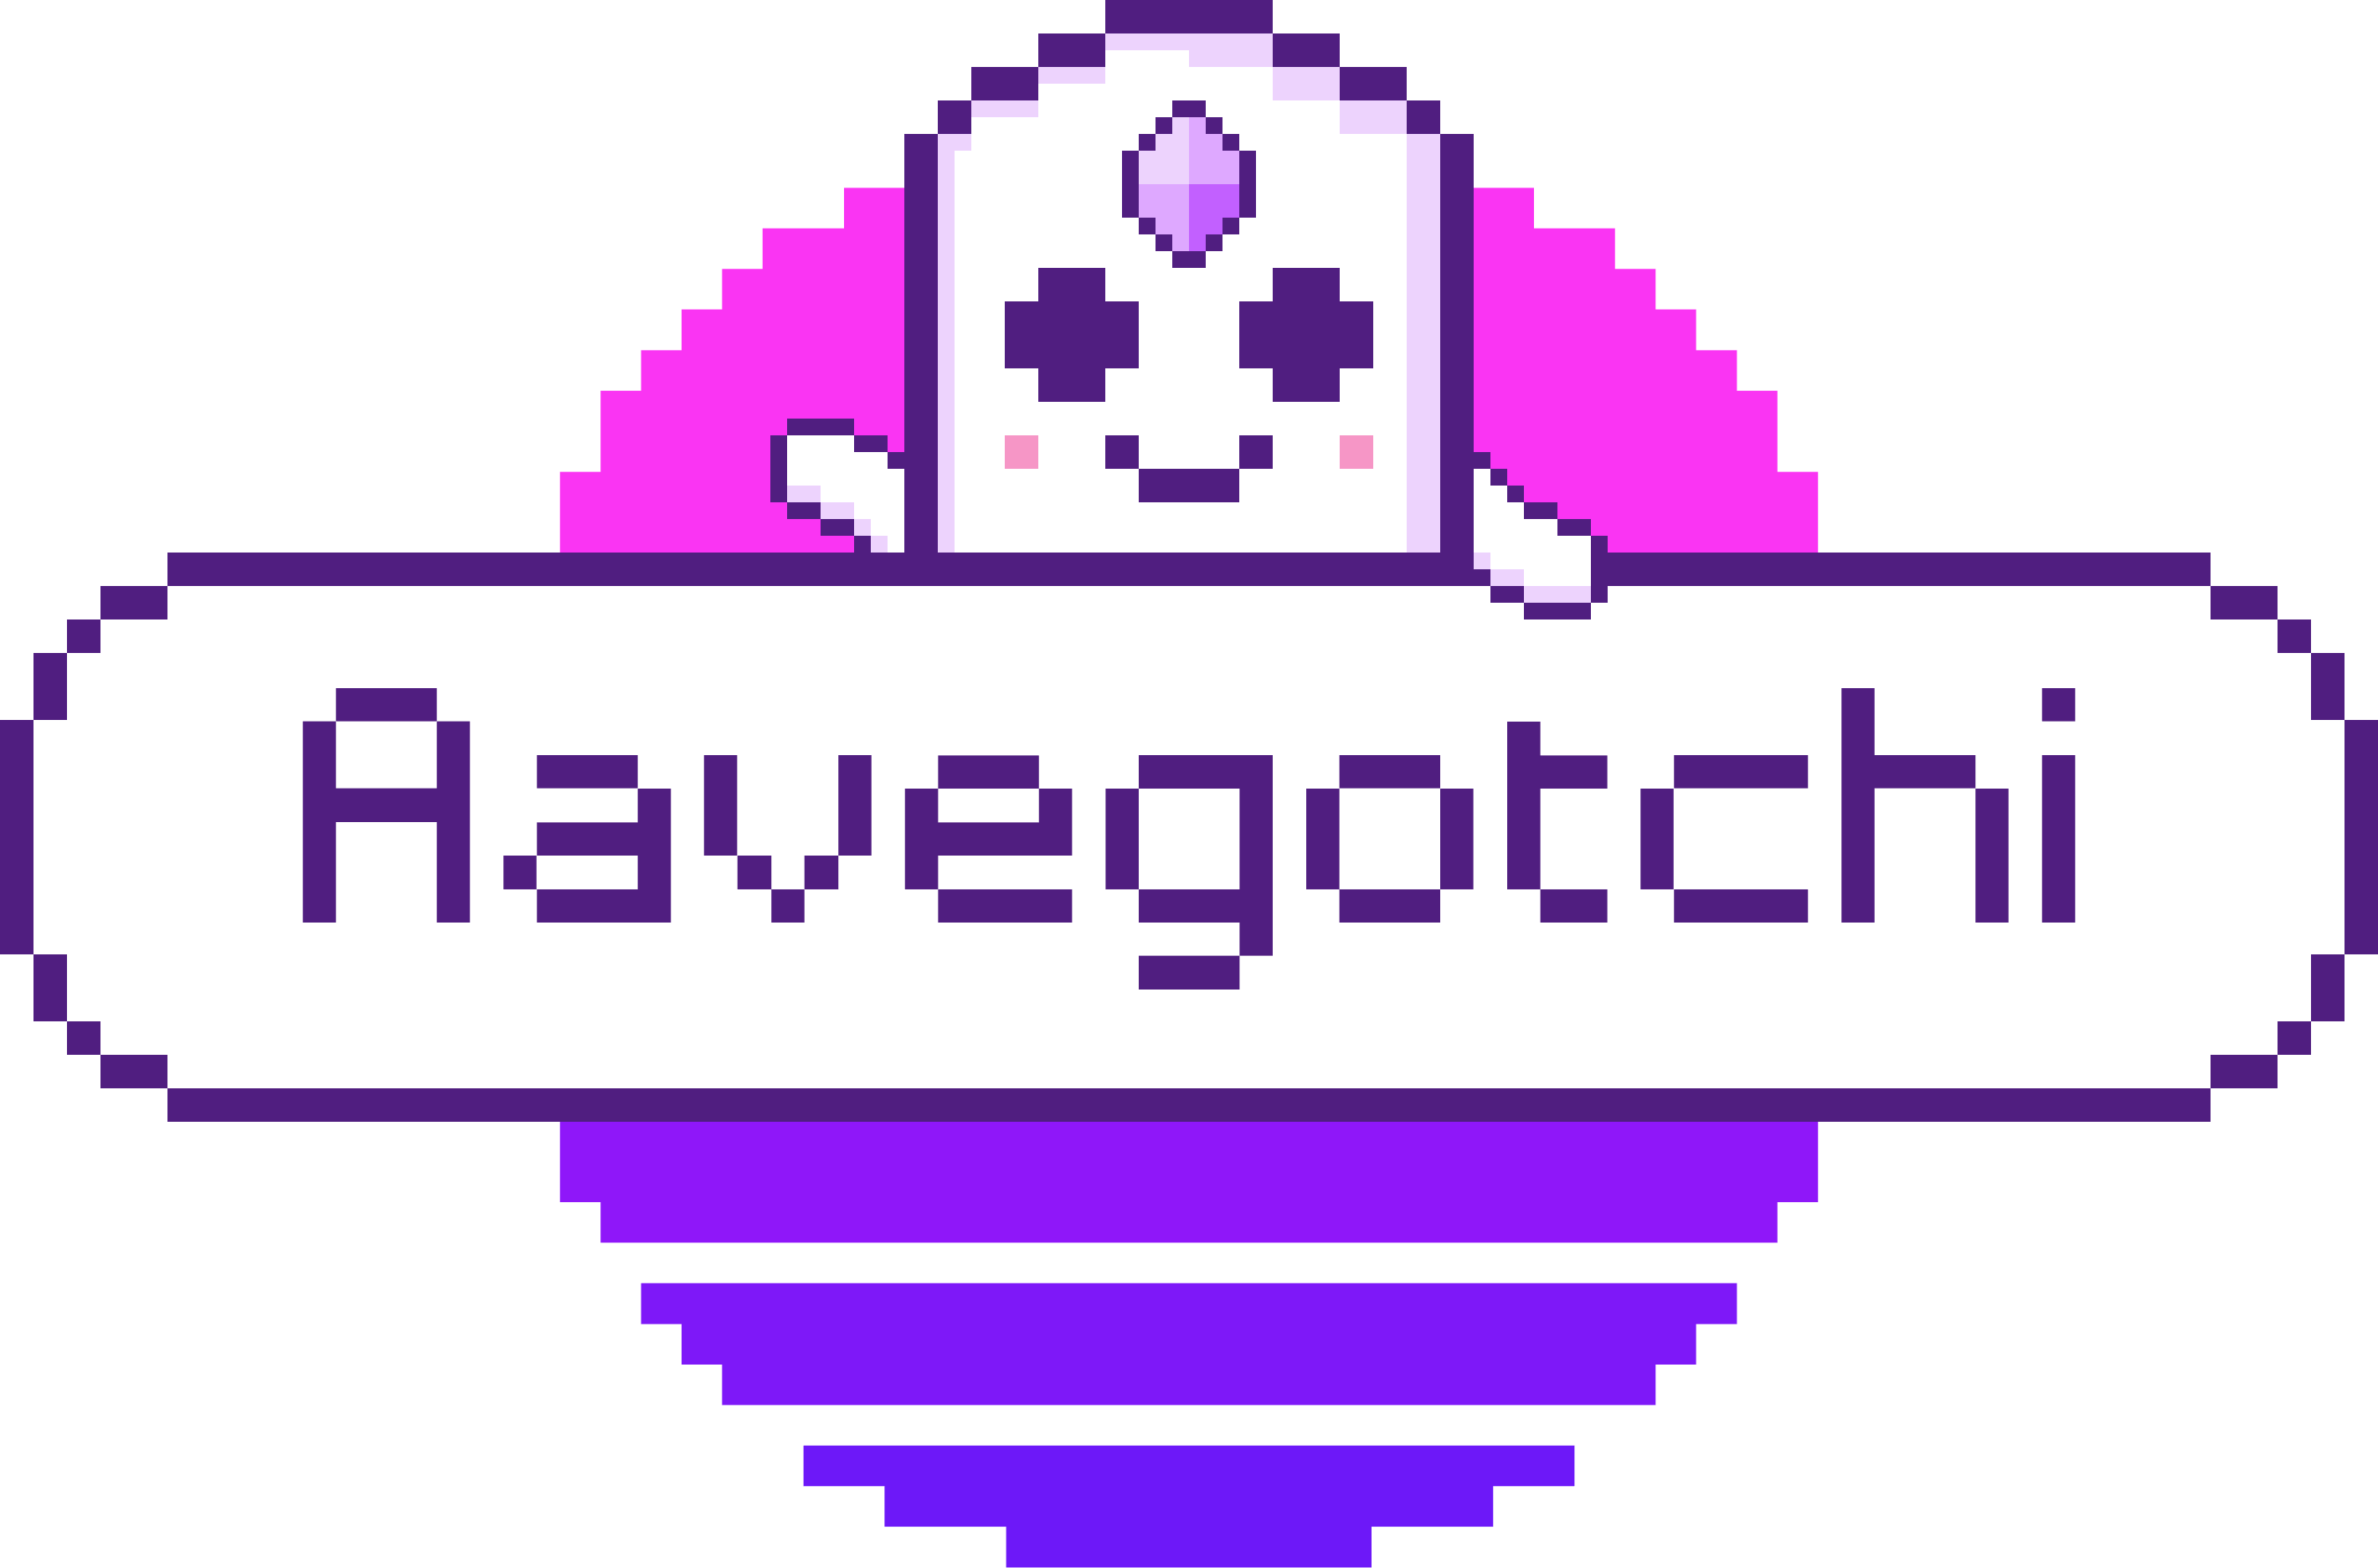 Aavegotchi  HackerNoon profile picture